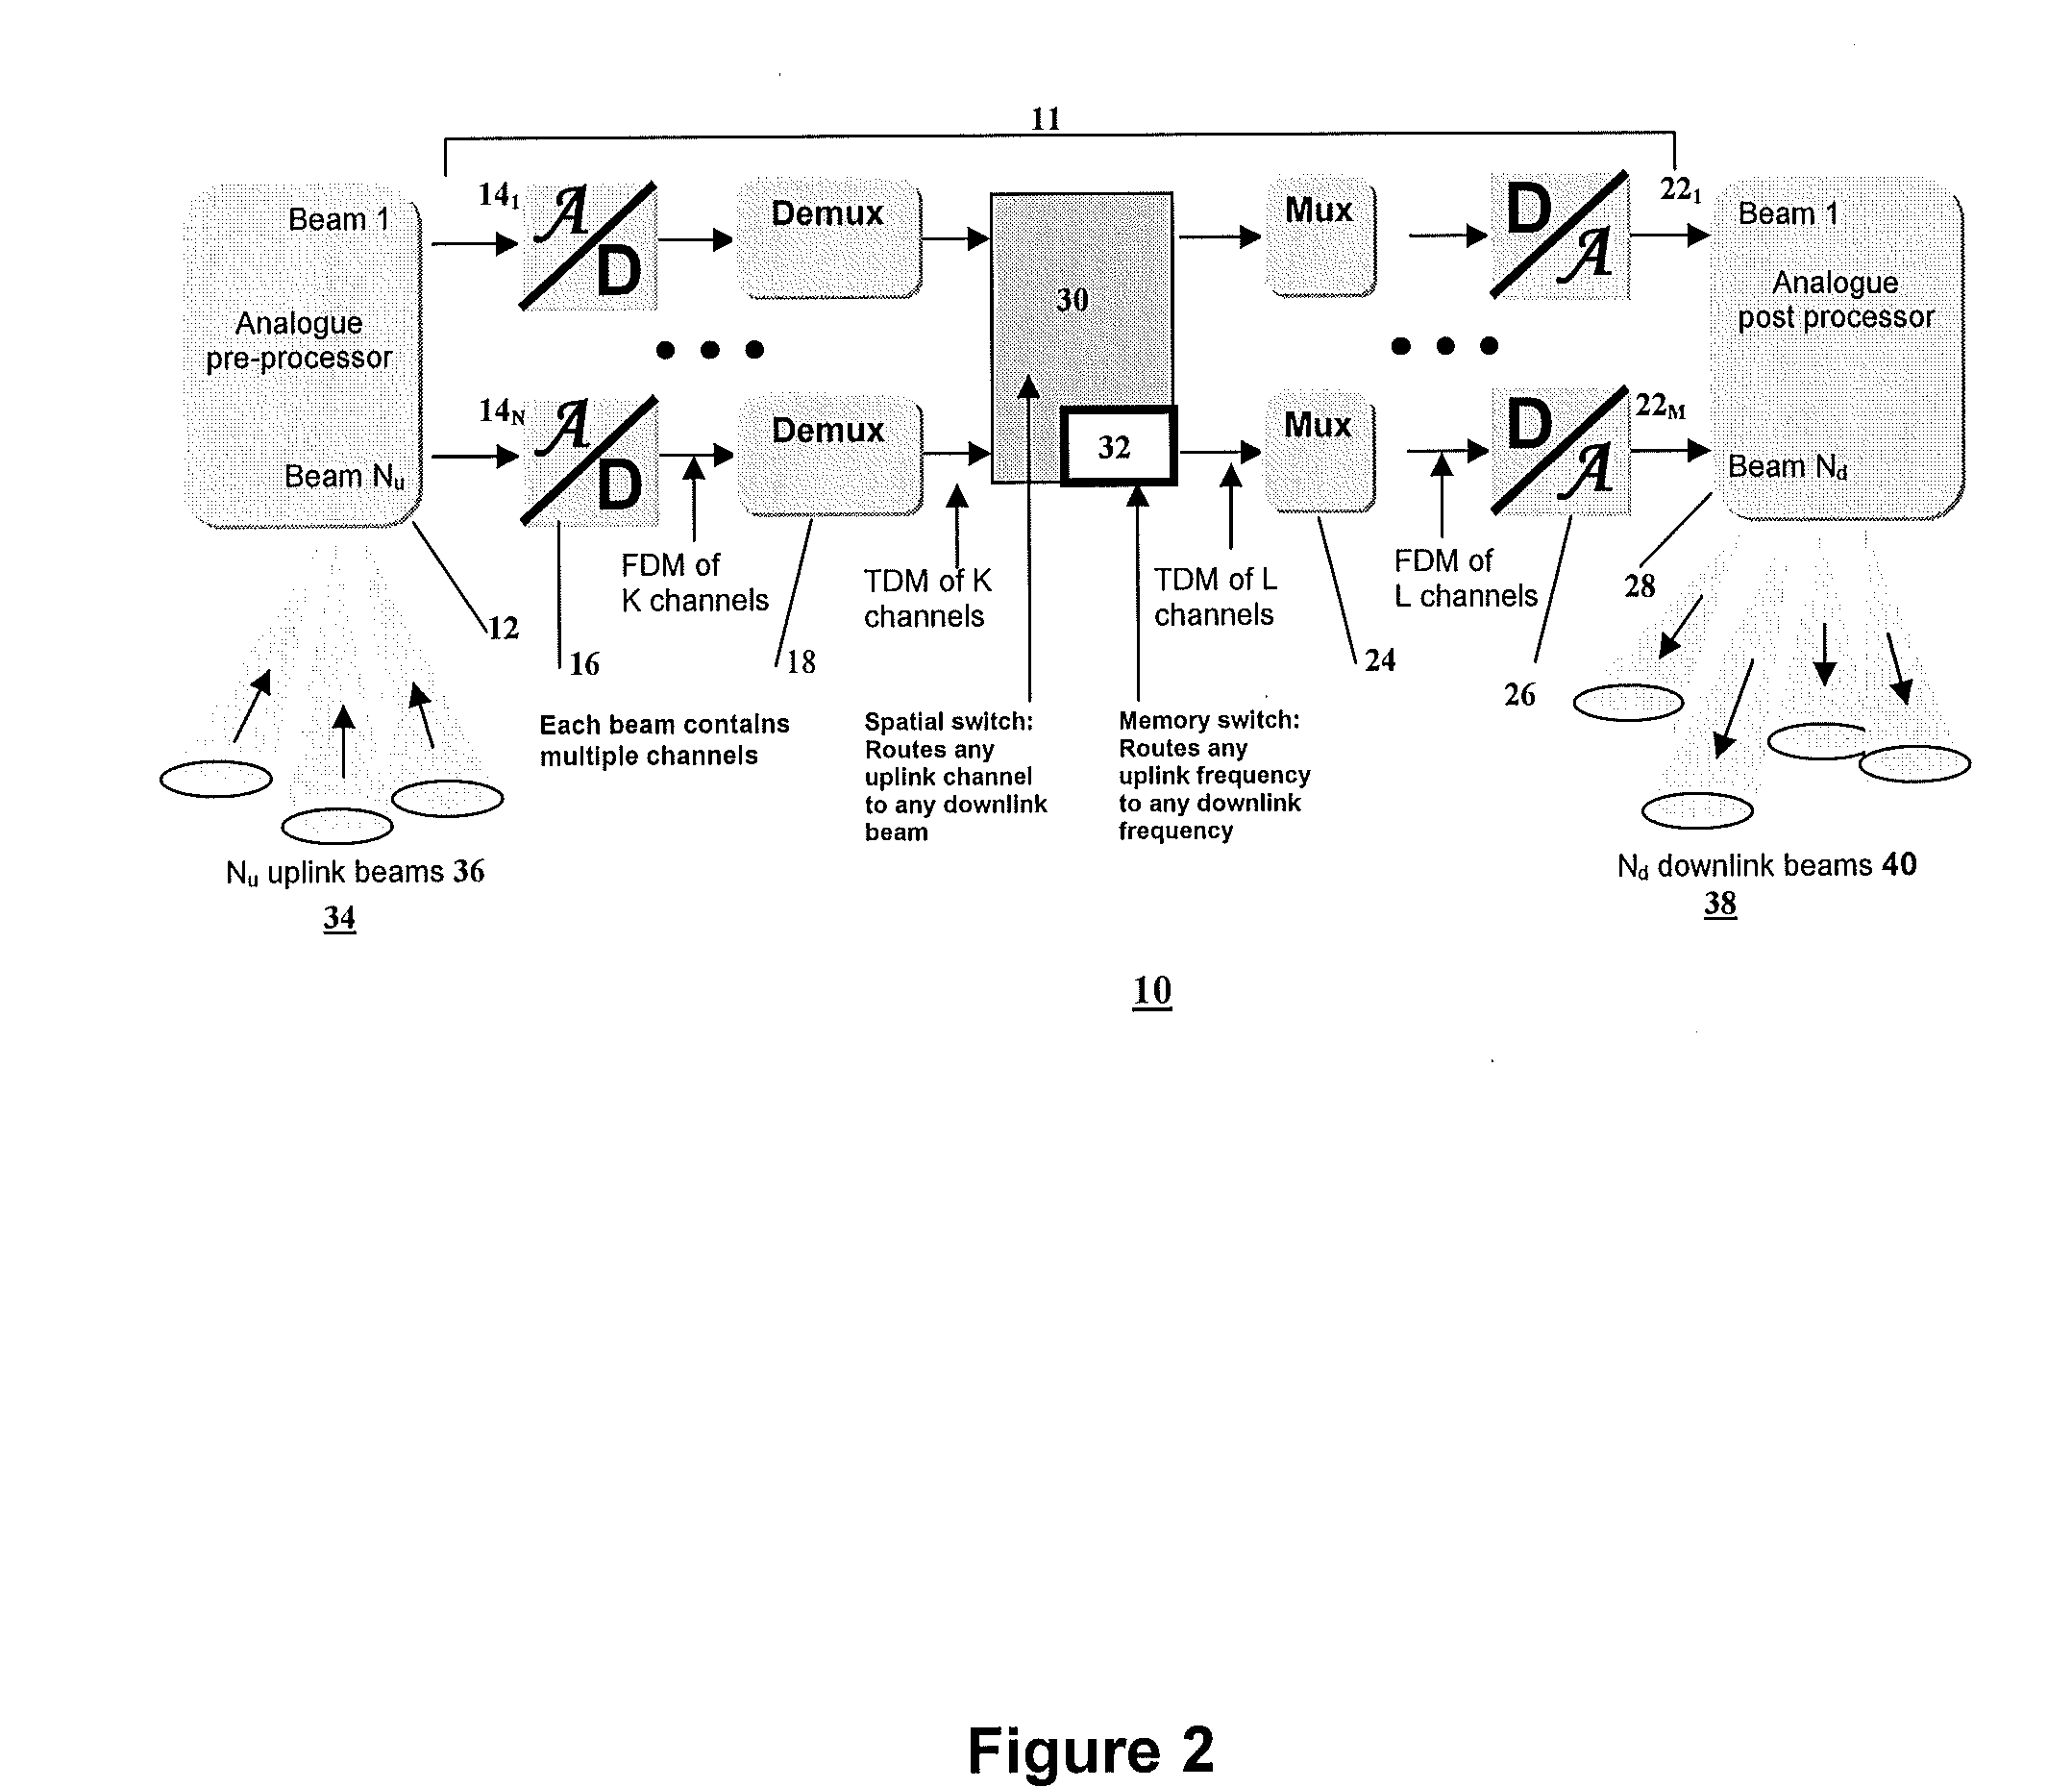 Modular digital processing system for telecommunications satellite payloads